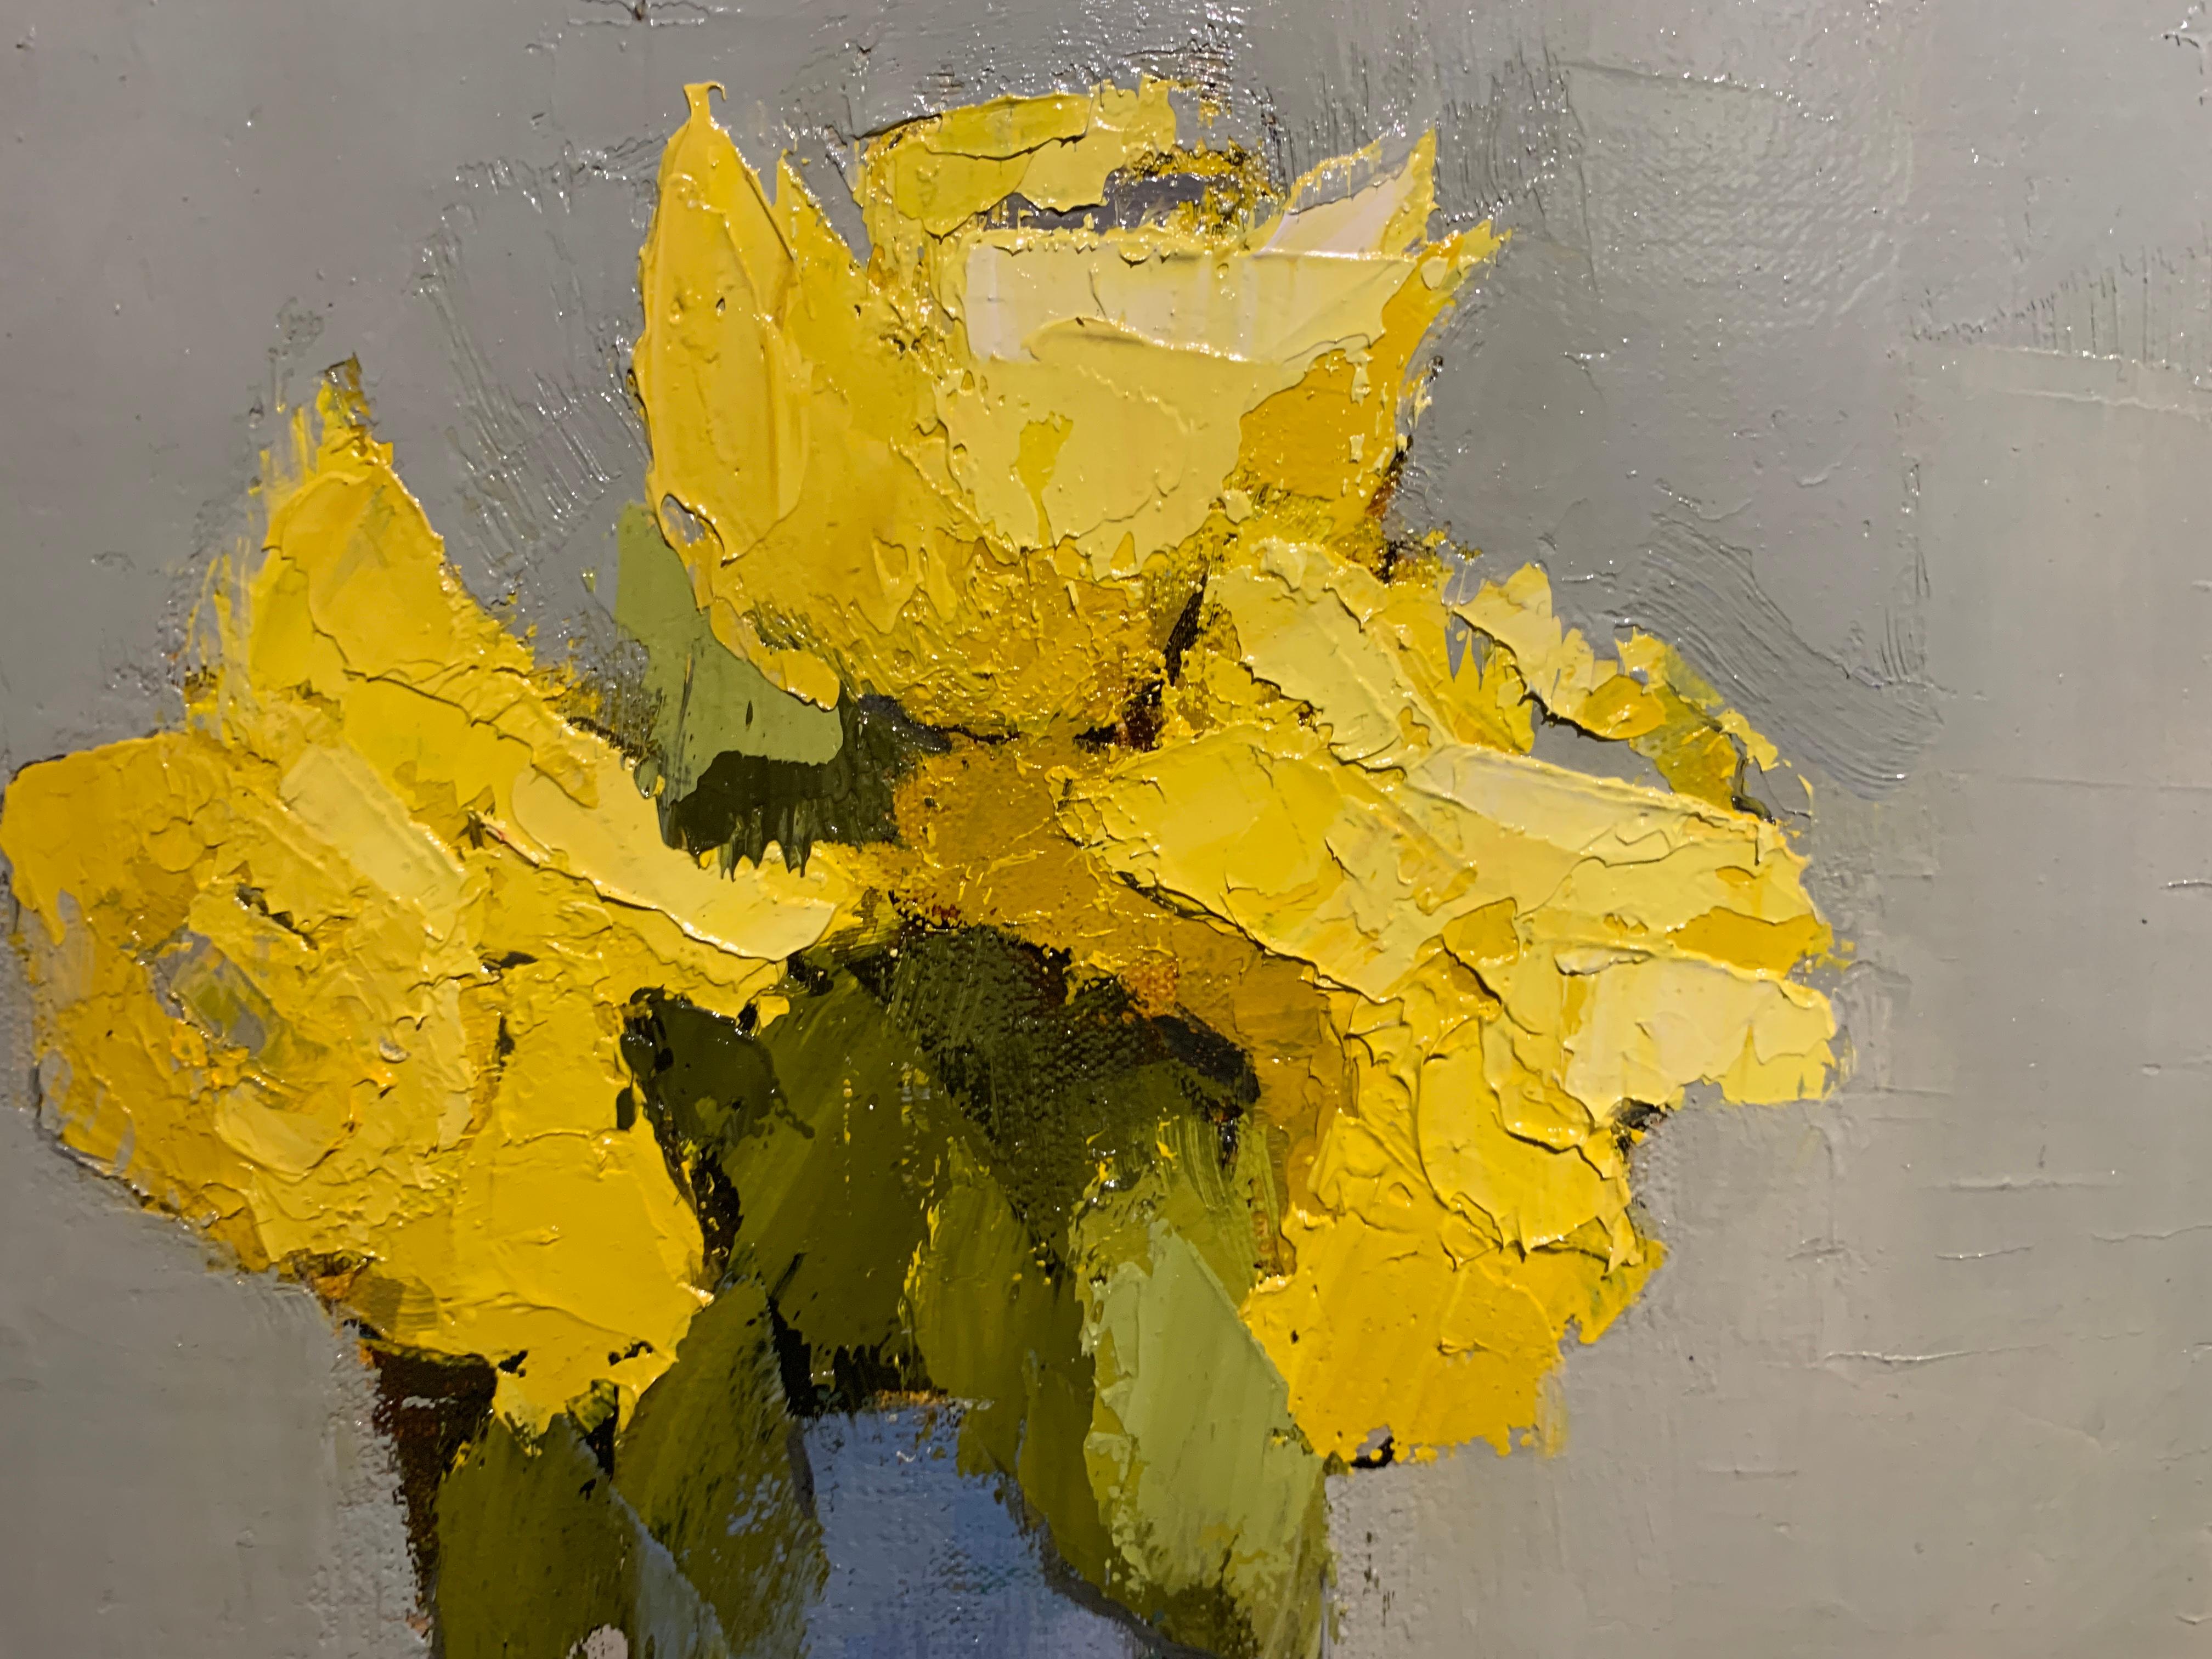 This petite impressionist 2019 painting from American artist Angela Nesbit depicts yellow flowers in a glass vase.  Green, blue, grey and yellow can be found in the soft and subtle palette.  The artist signed this piece on the bottom right.